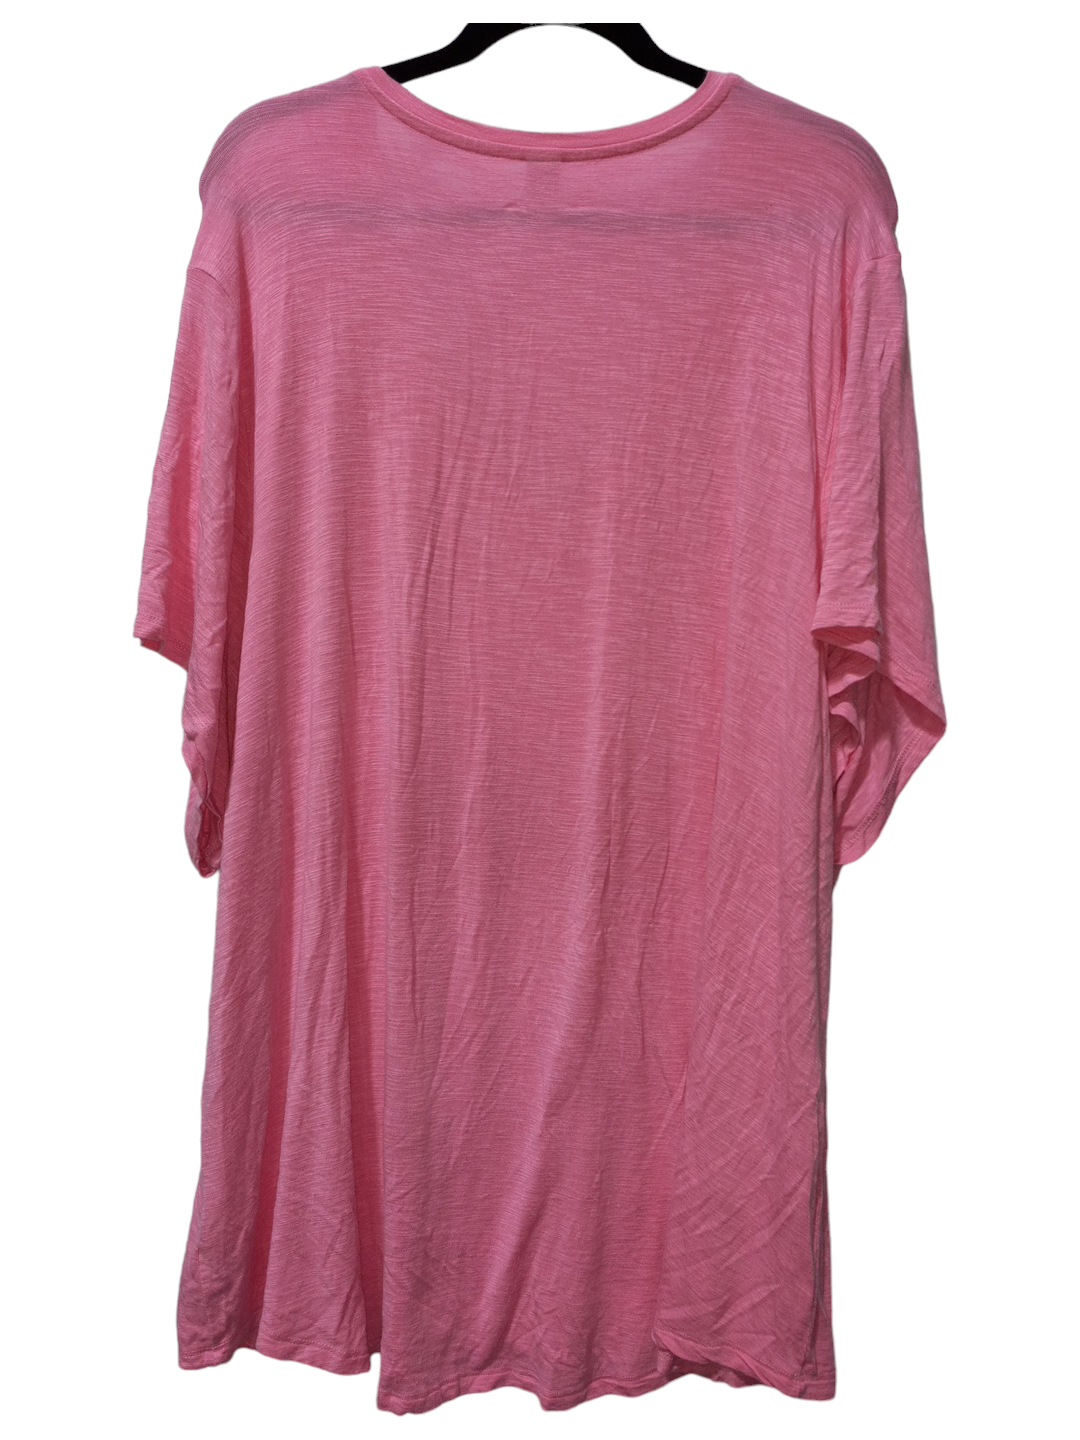 Pink Top Short Sleeve Old Navy, Size 4x